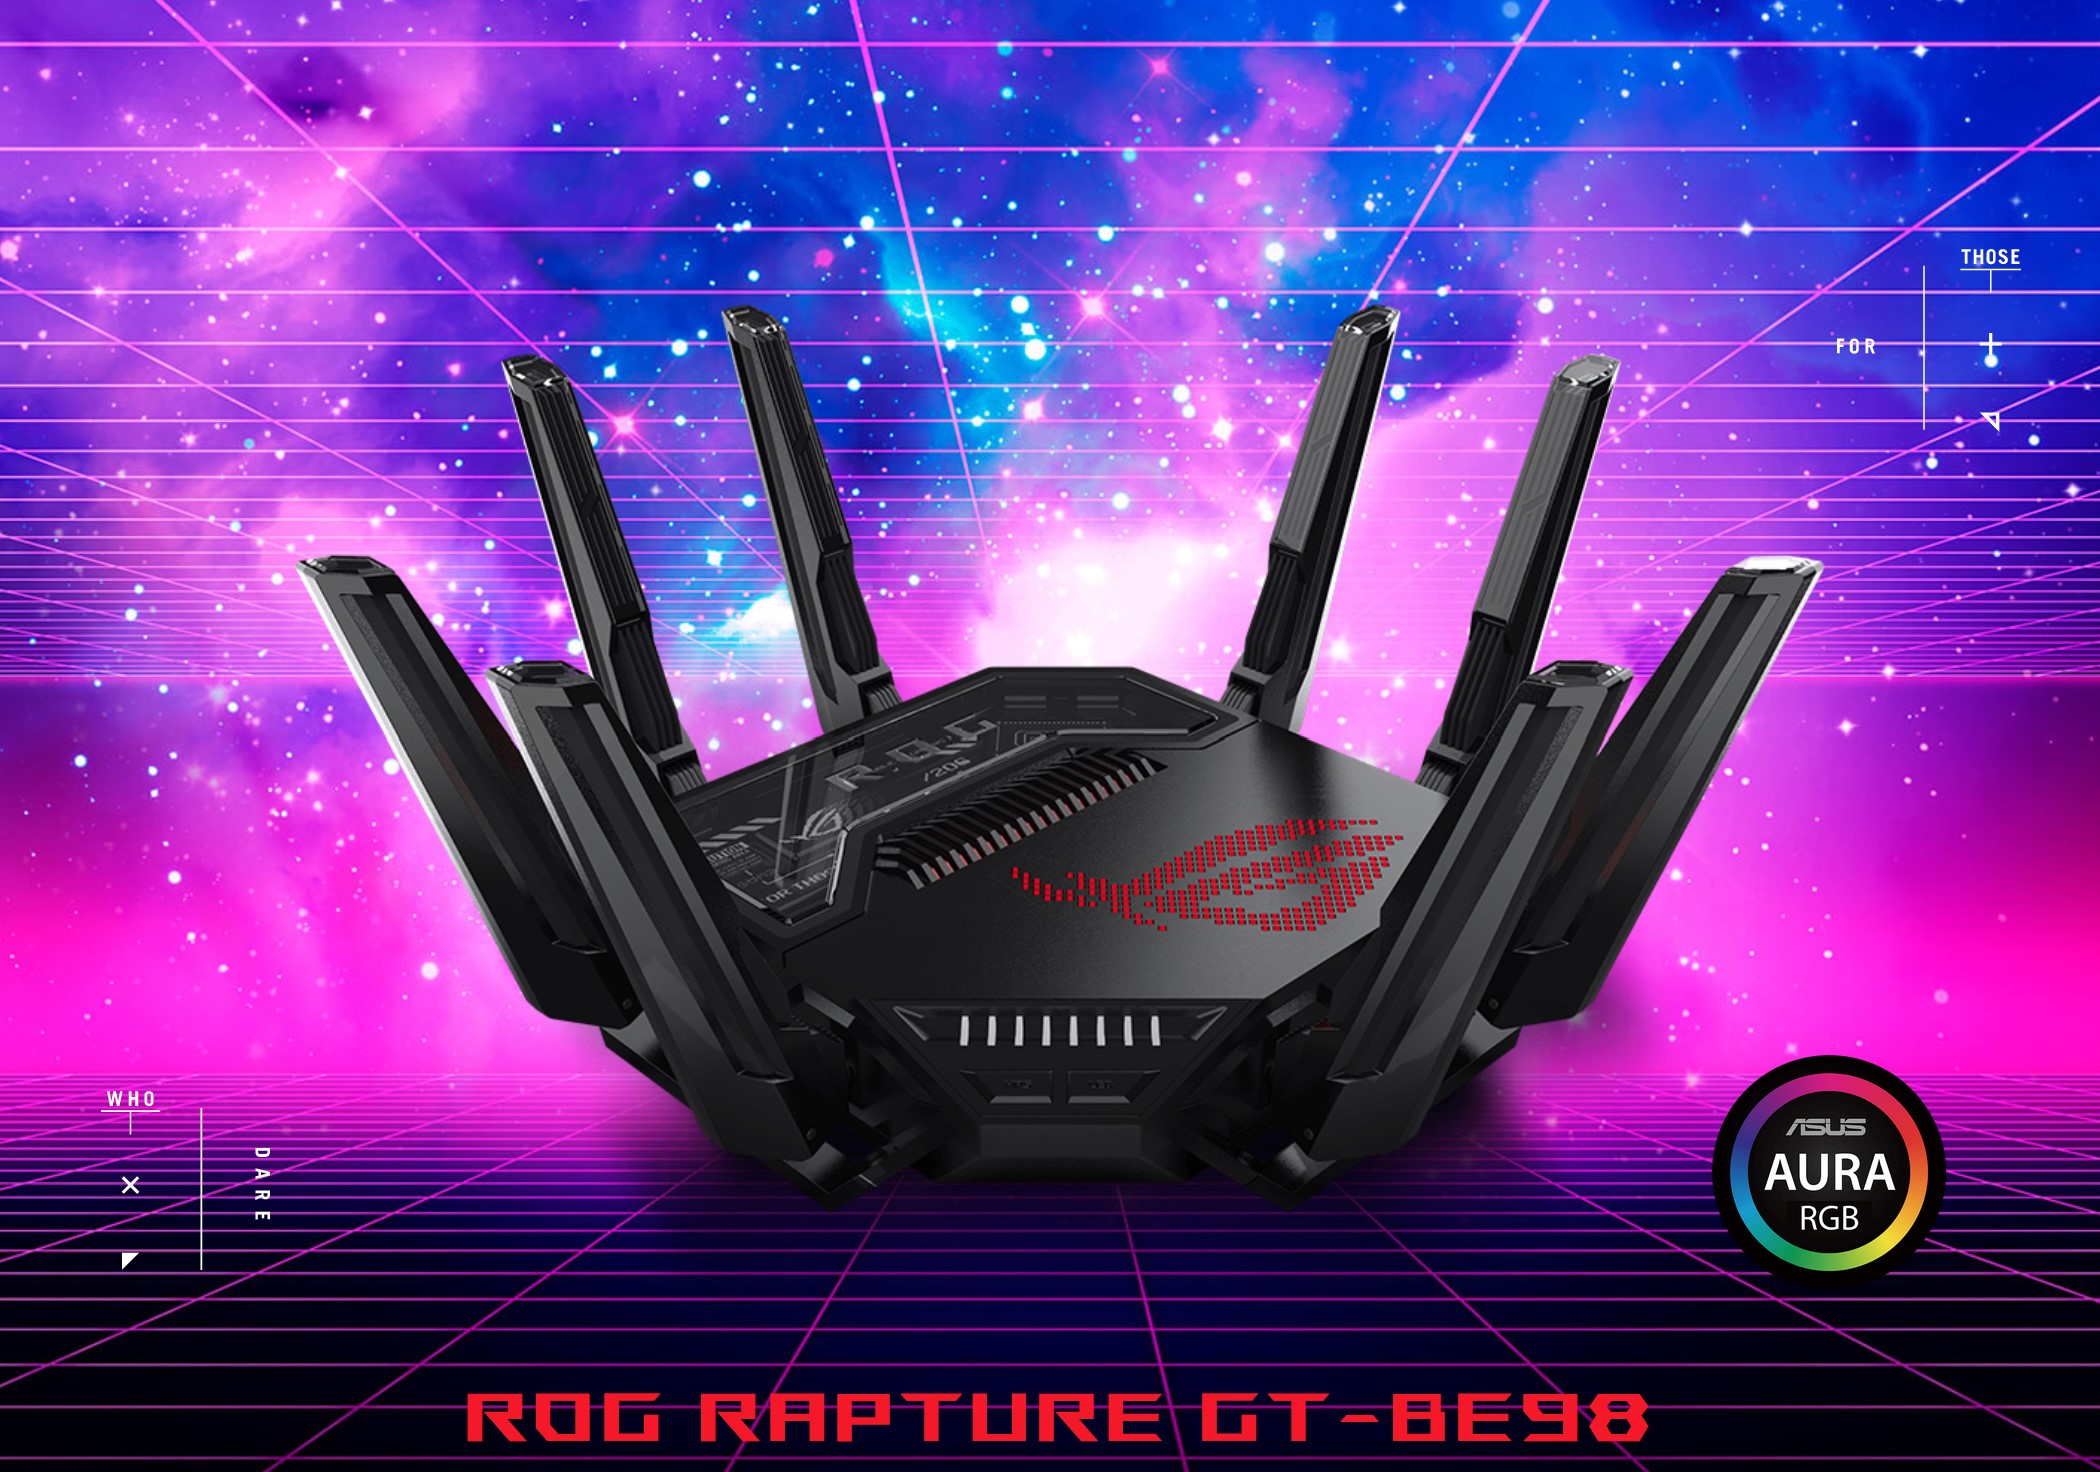 ASUS ROG Rapture GT-BE98 Wi-Fi 7 quad-band router with gaming at its heart ...